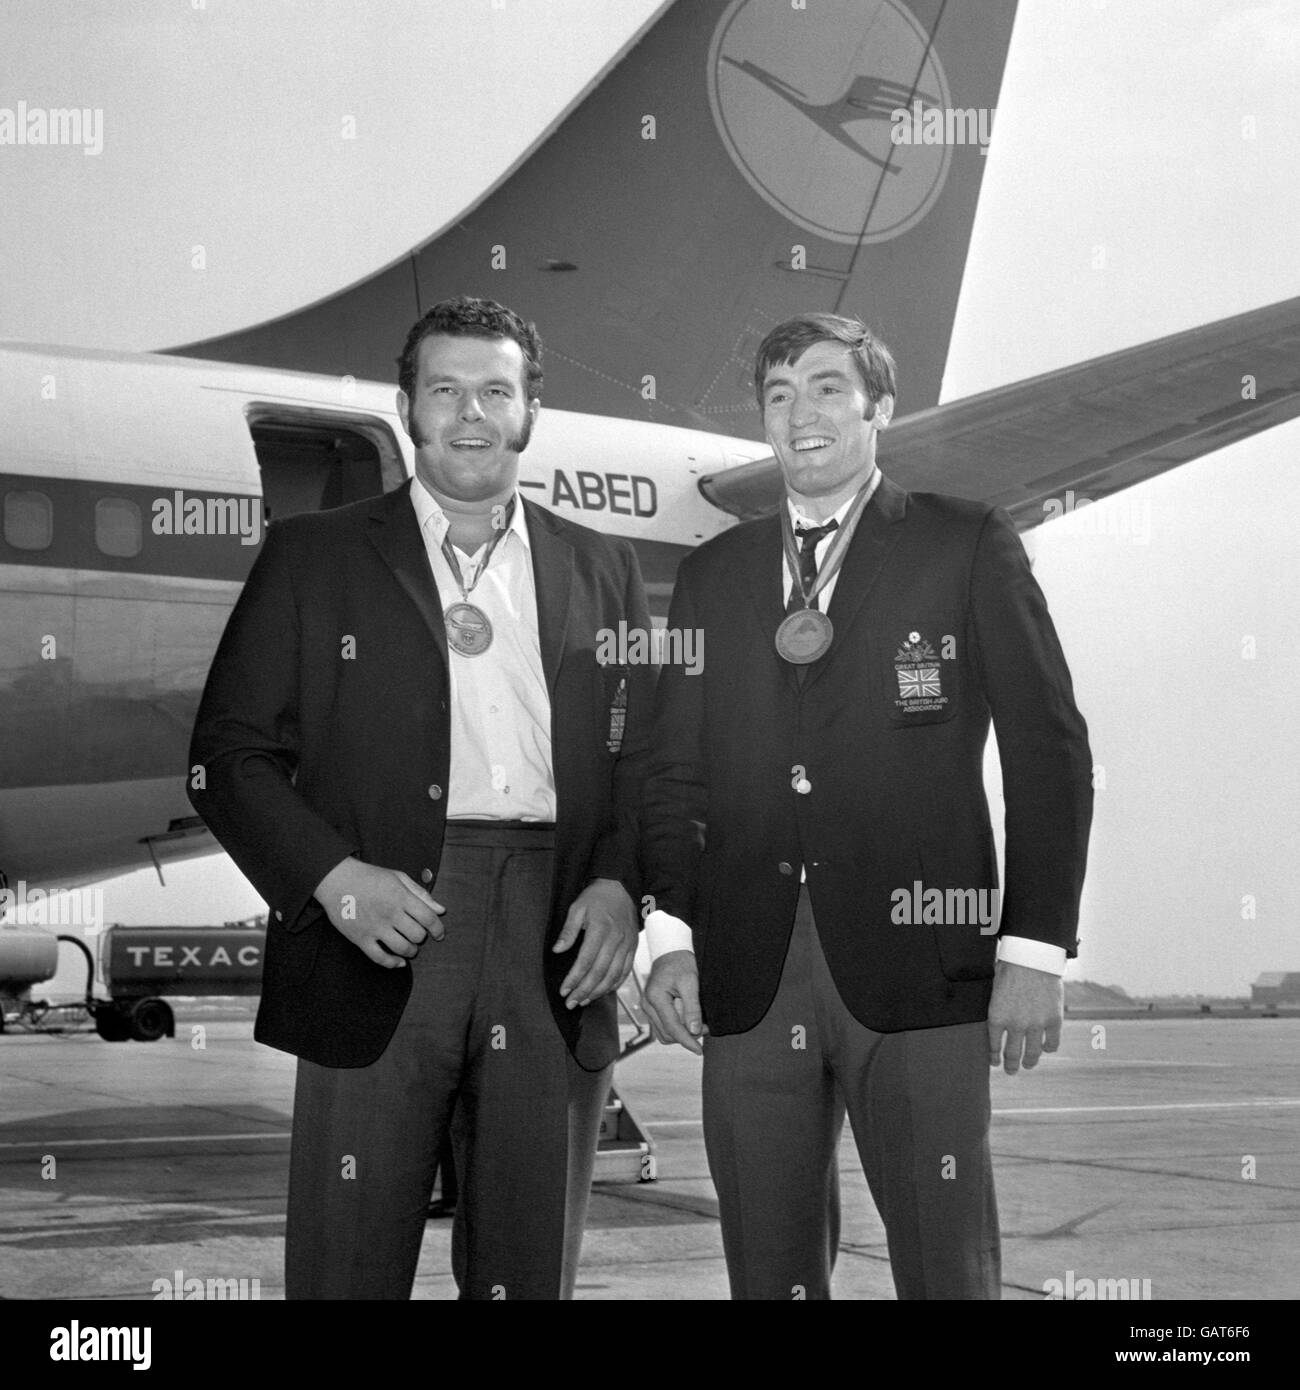 Keith Remfry, left, and David Starbrook, arriving back from the World Judo Championships where they both won gold medals. Starbrook went on to win the silver medal in the 80-93kg category in the 1972 Munich Olympics Games, and Remfry won the silver medal in the Open Class at the 1976 Olympics in Montreal. Stock Photo